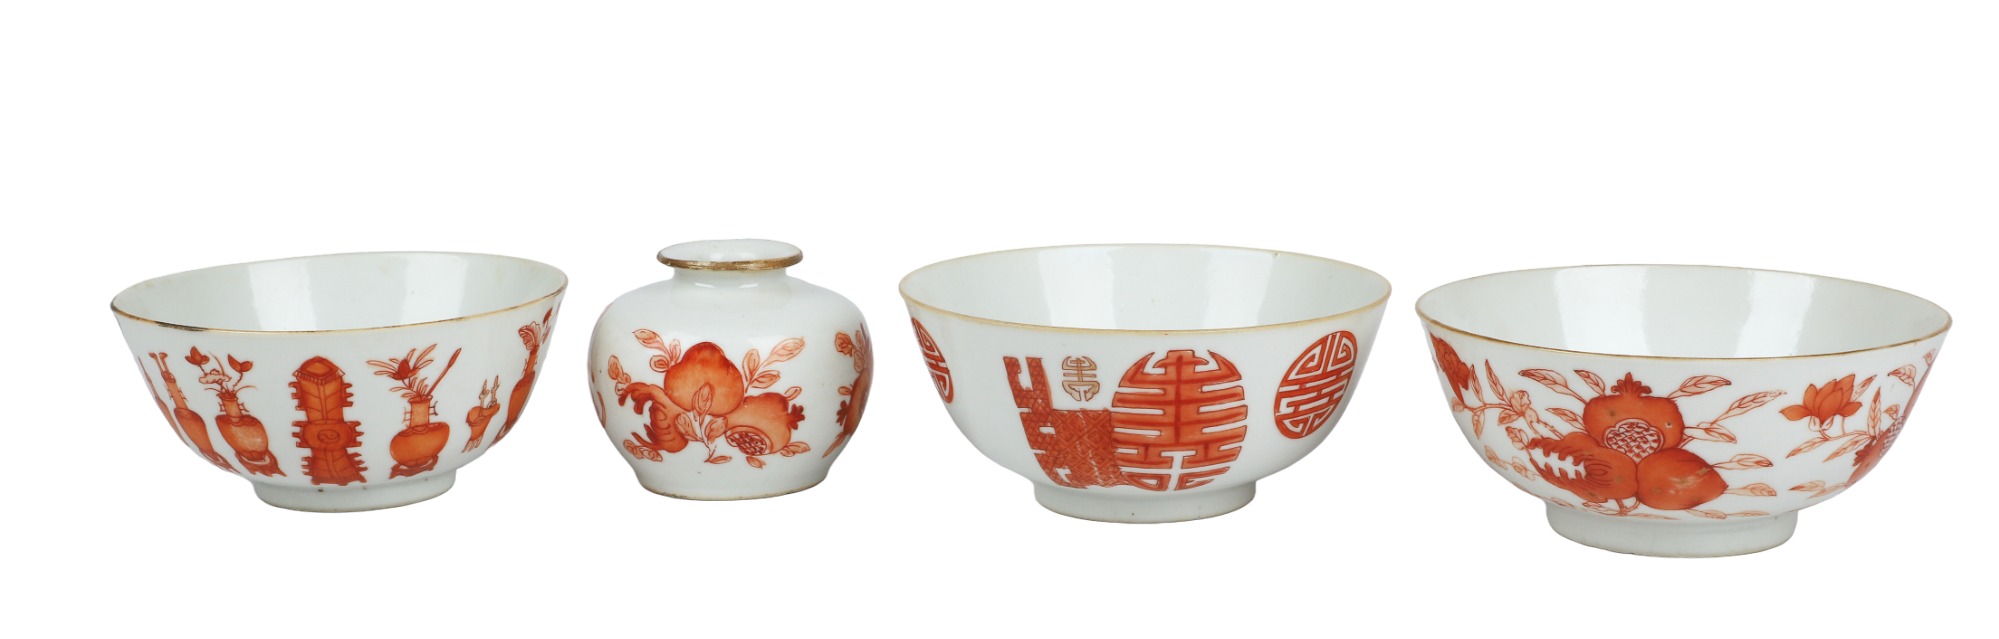  4 Pcs Chinese porcelain with 3ca70b